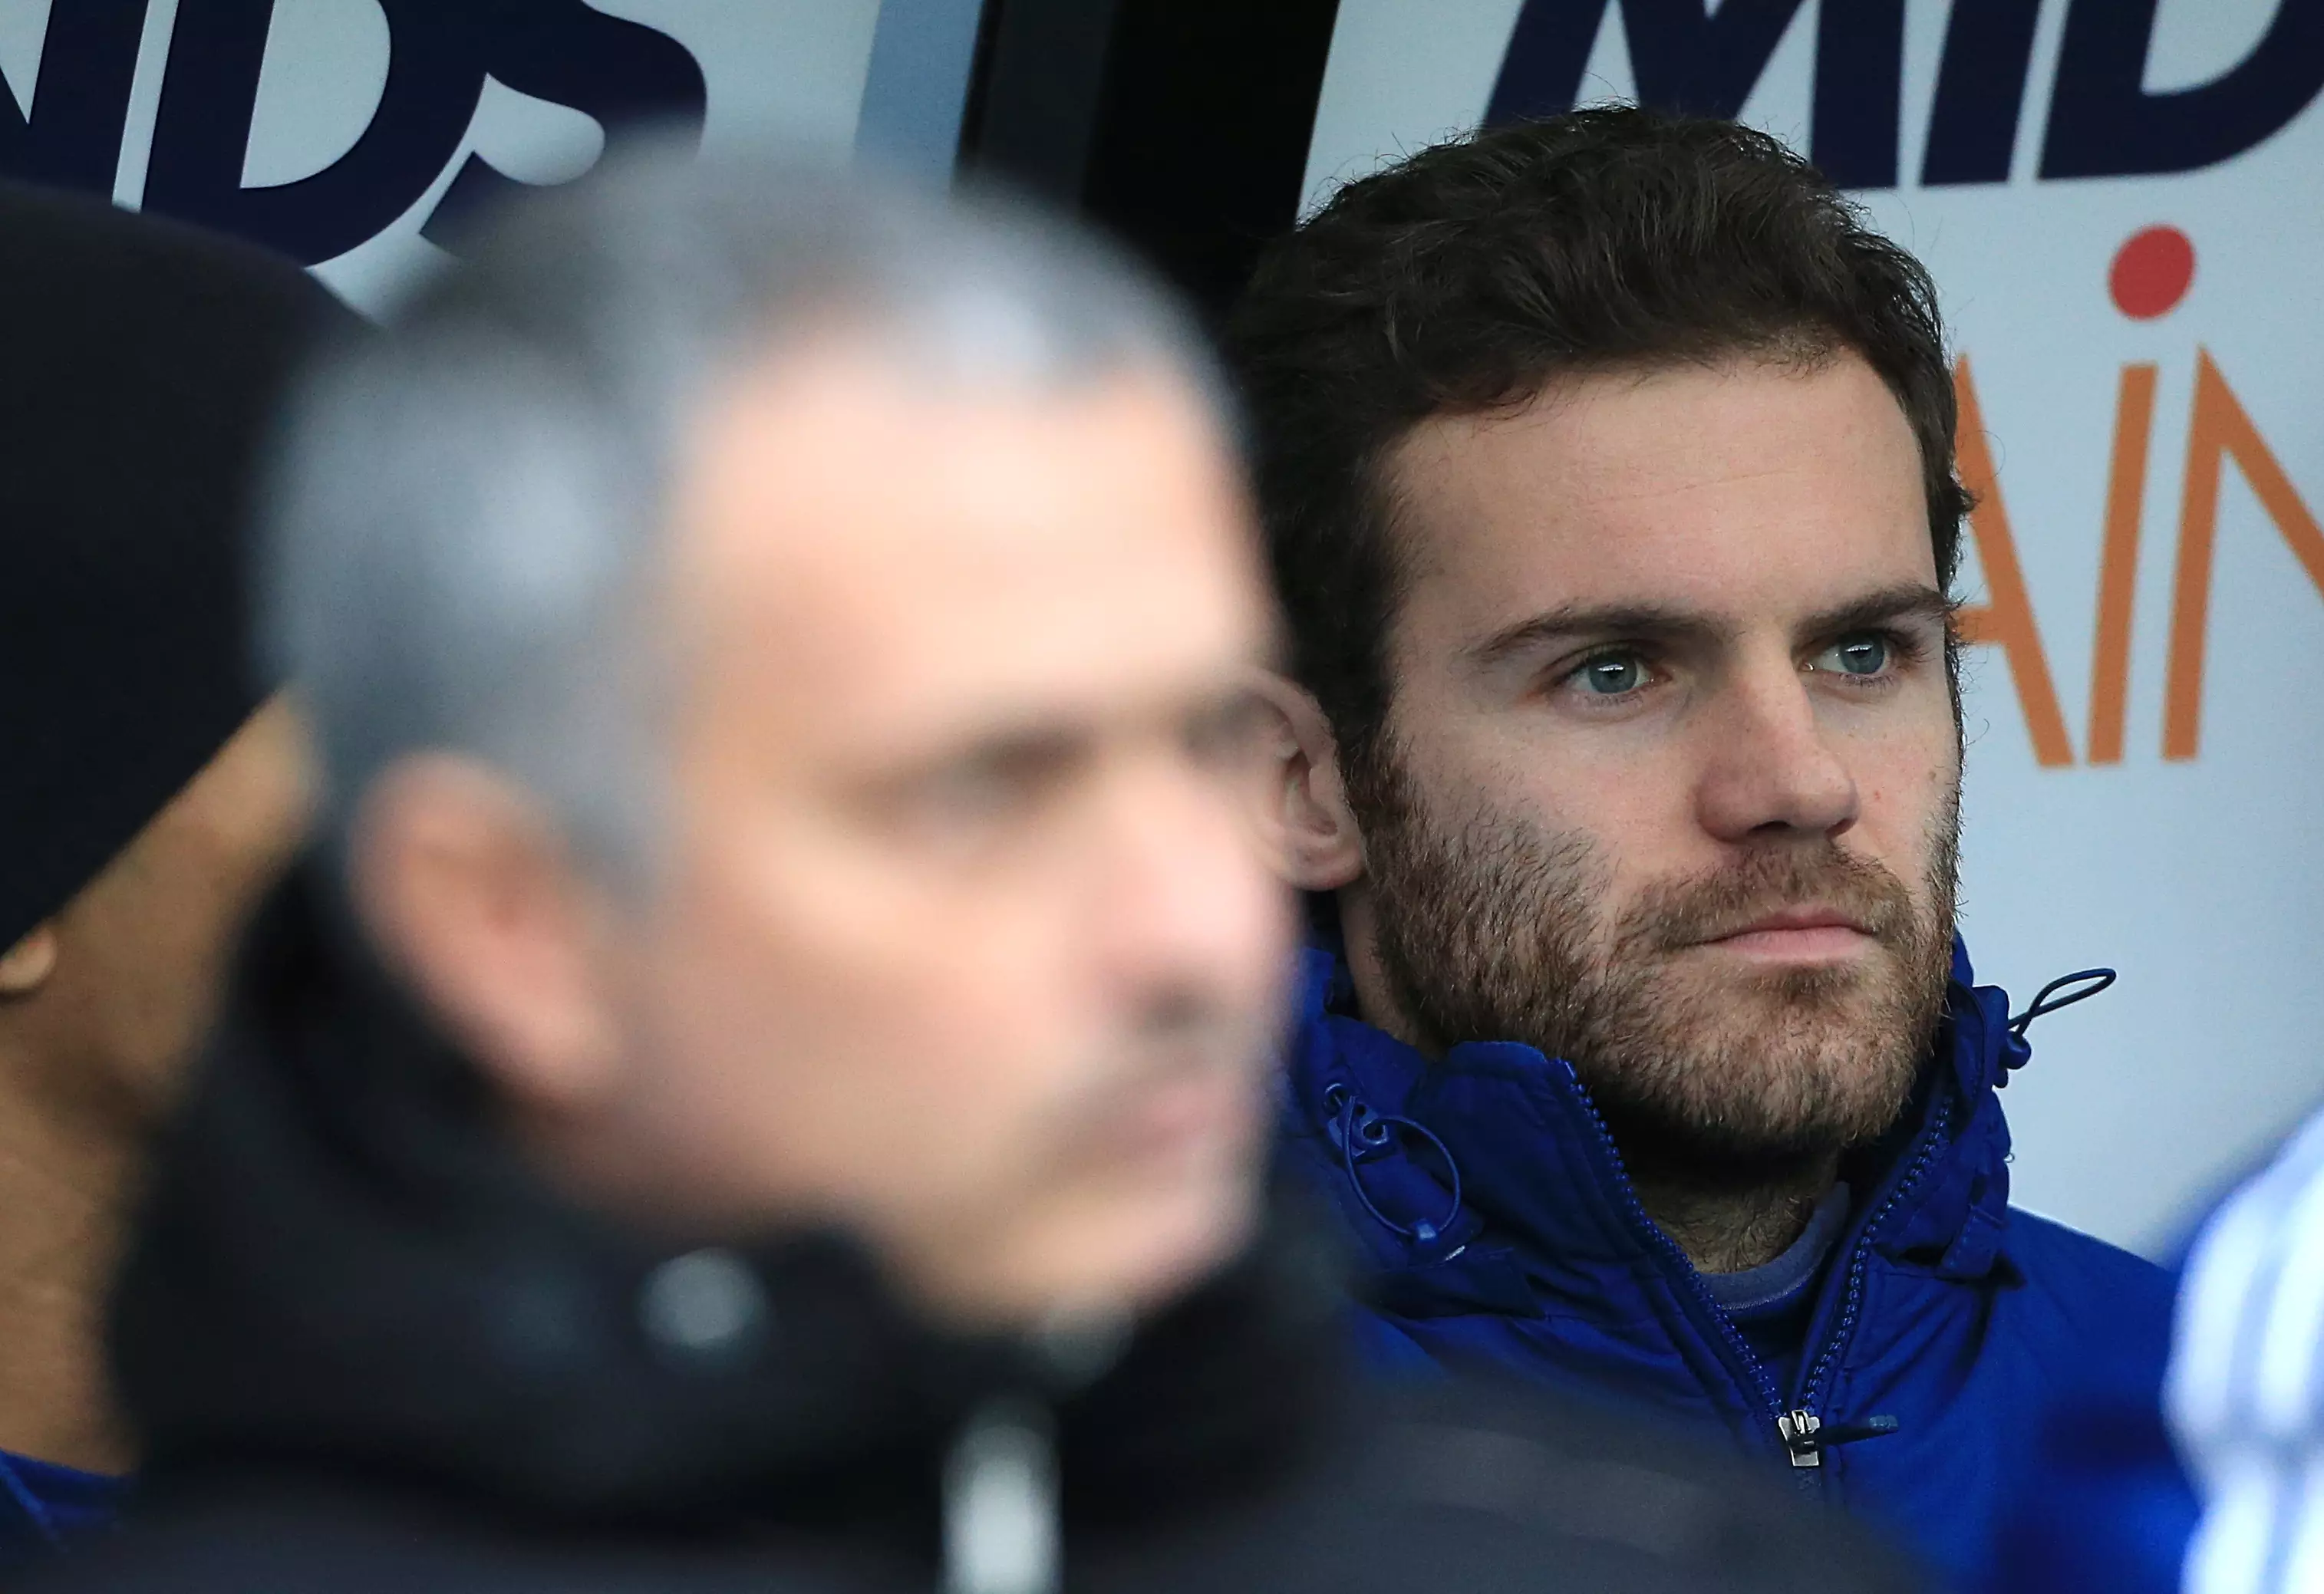 Mata had to get used to this scene at Stamford Bridge under Mourinho. Image: PA Images